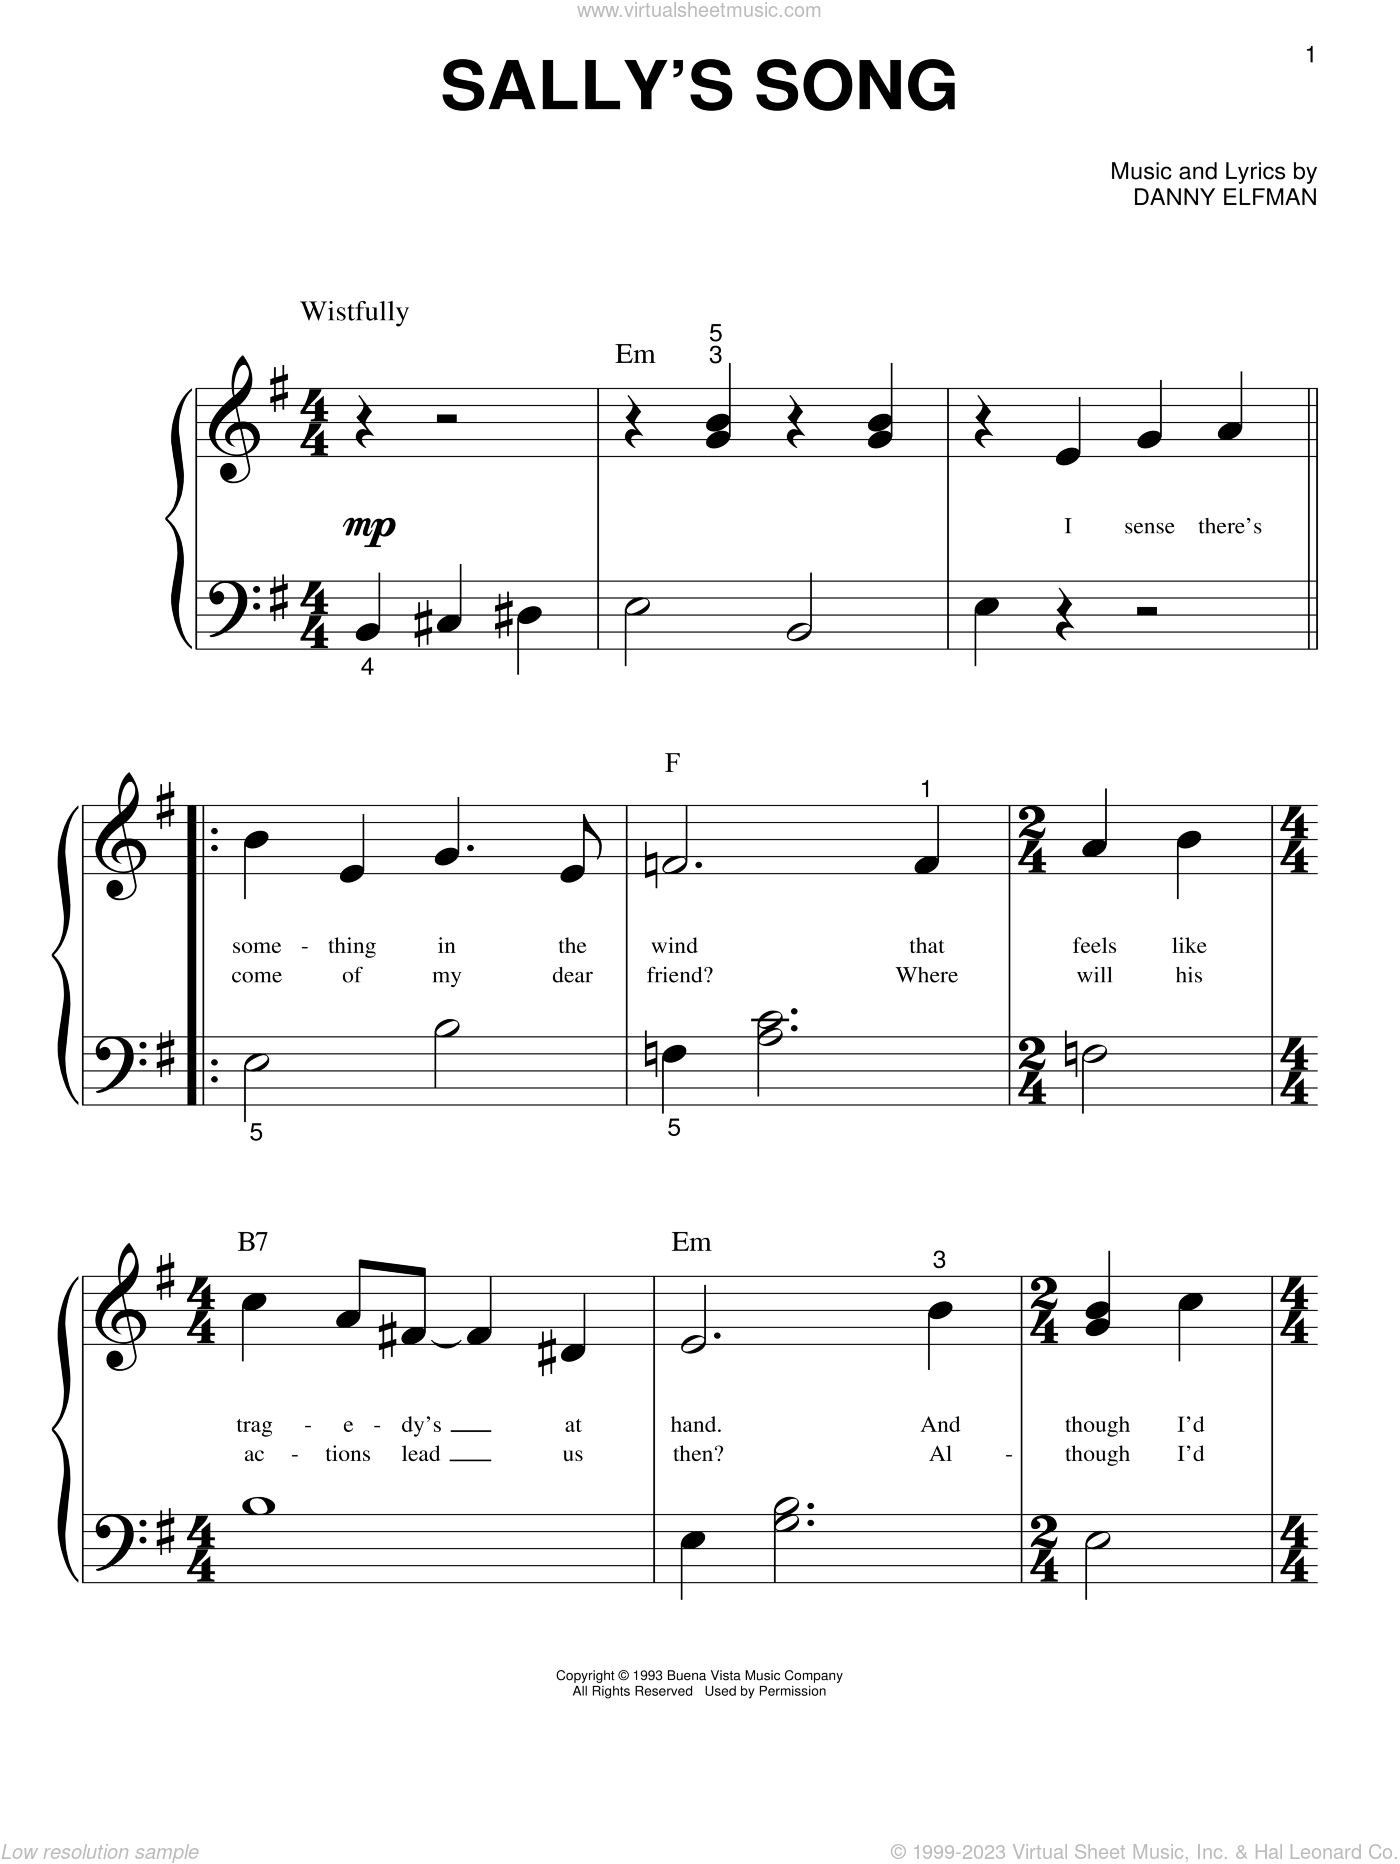 Elfman - Sally's Song (from The Nightmare Before Christmas) sheet music for piano solo (big note ...